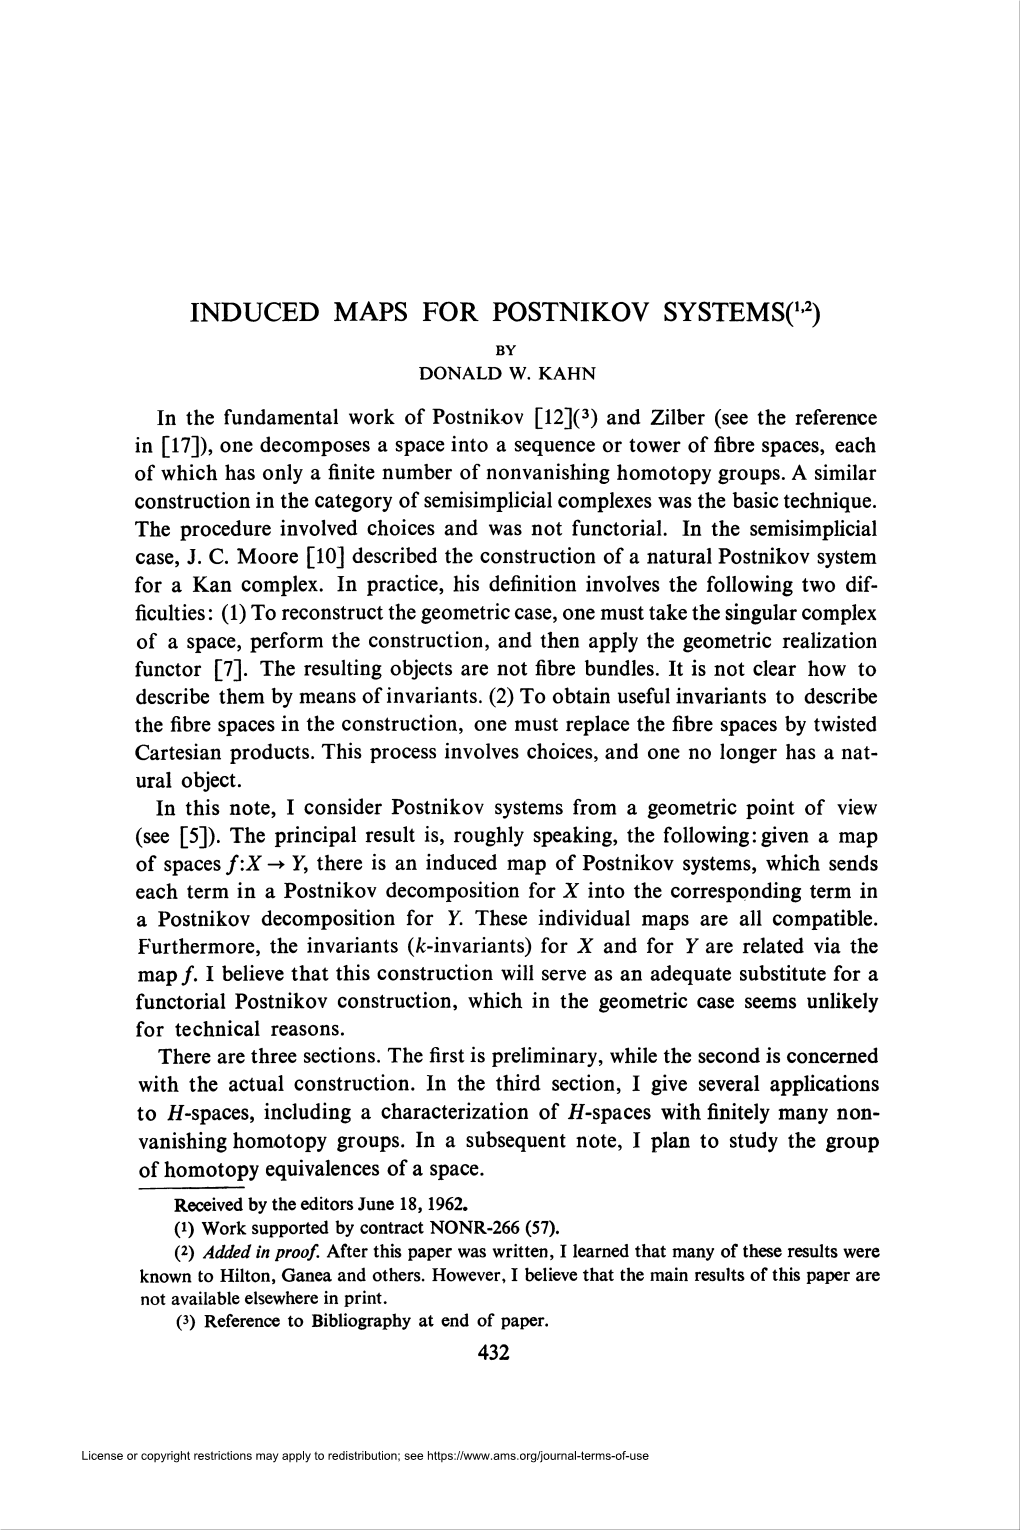 Induced Maps for Postnikov Systems('-2) by Donald W